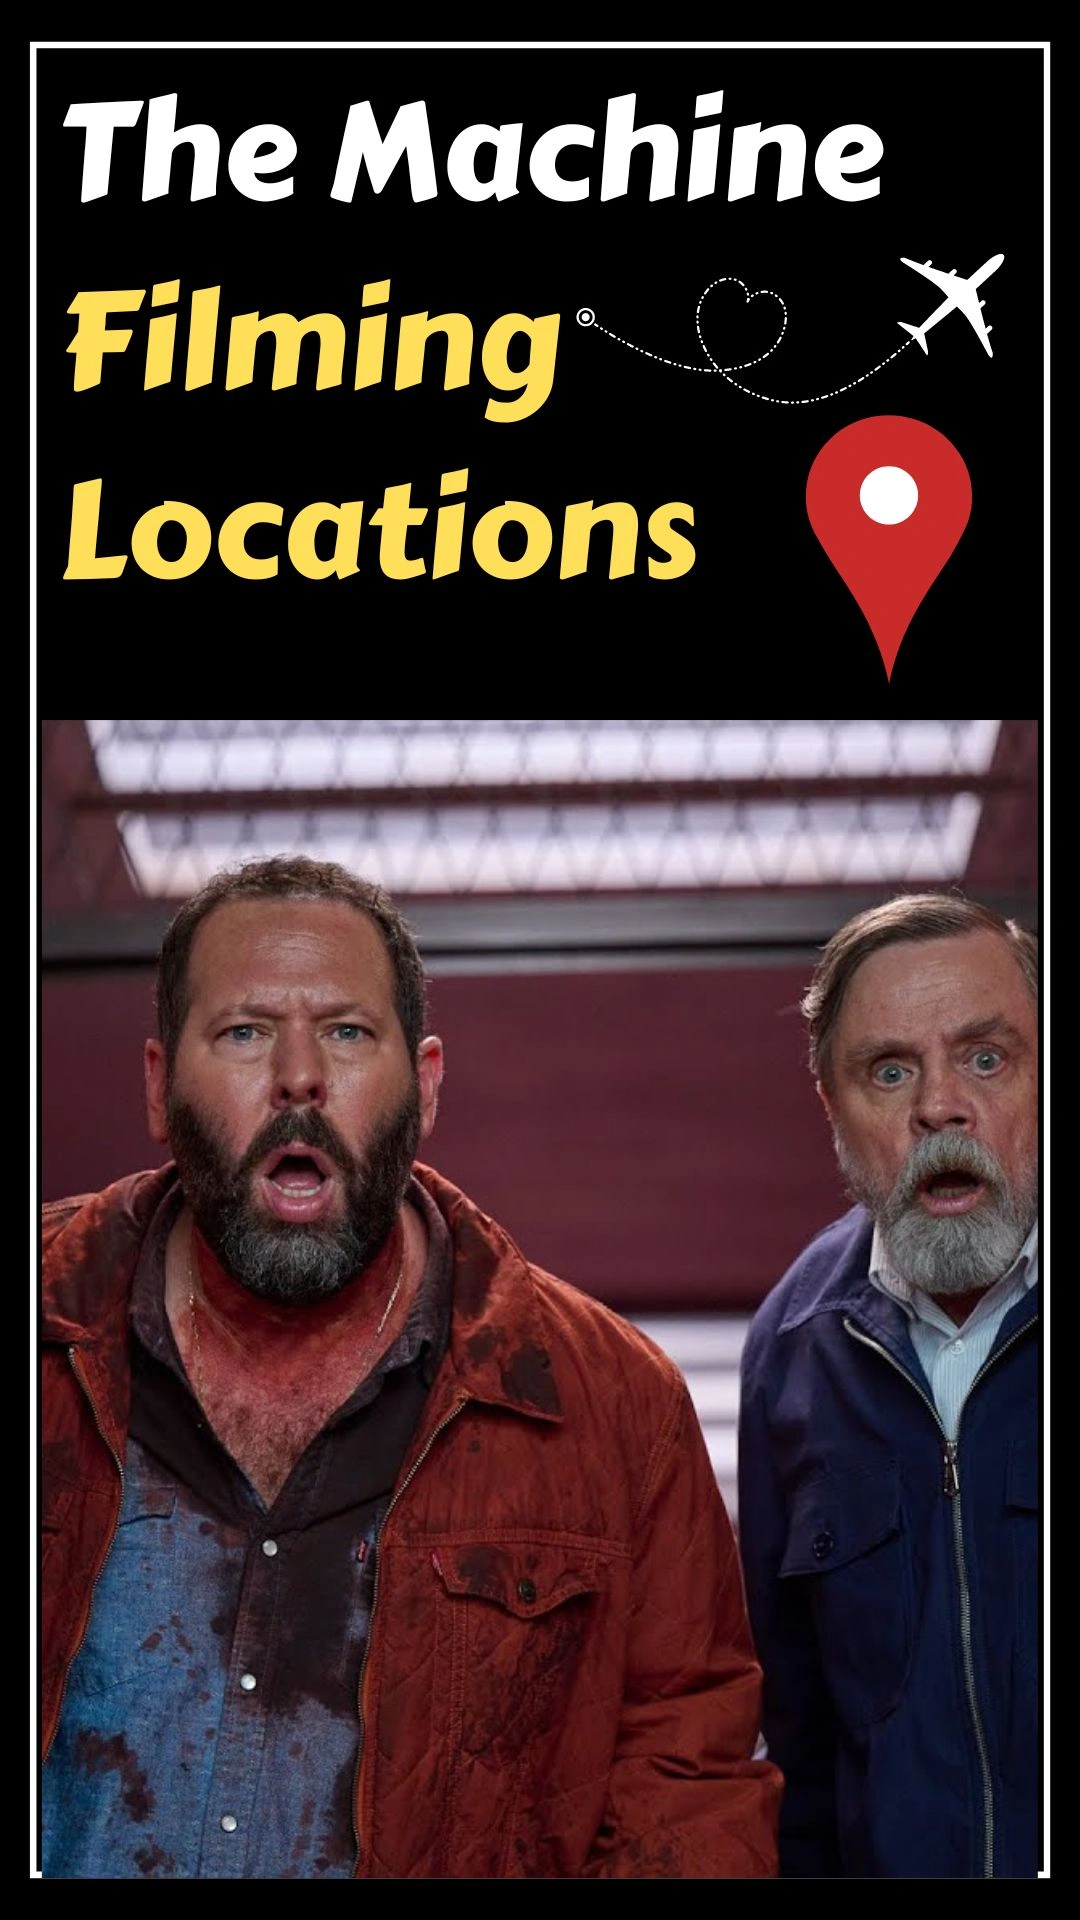 The Machine Filming Locations